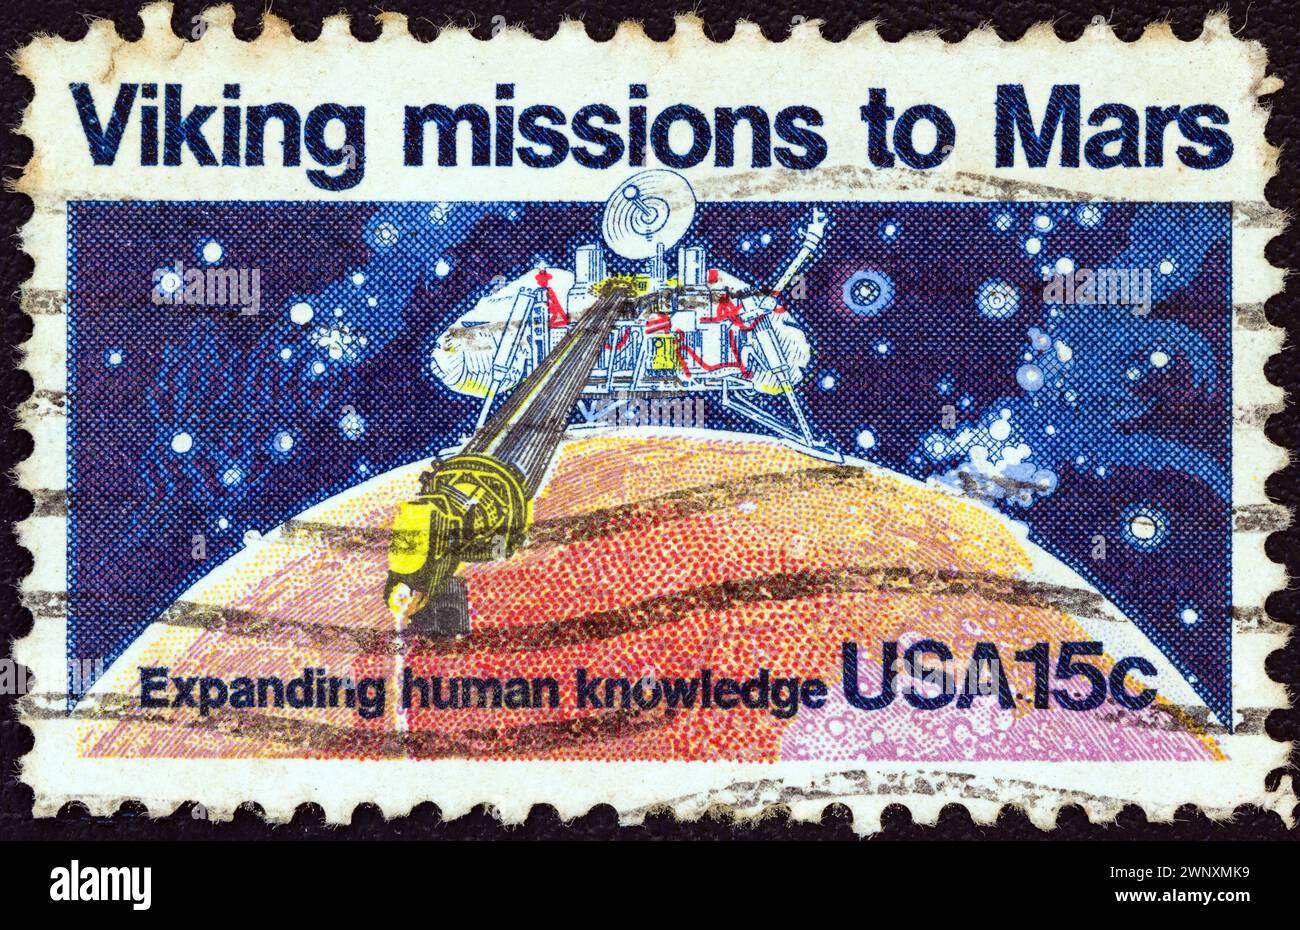 USA - CIRCA 1978: A stamp printed in USA issued for the 2nd anniversary of Viking 1 landing on Mars shows Viking 1 lander scooping soil from Mars Stock Photo